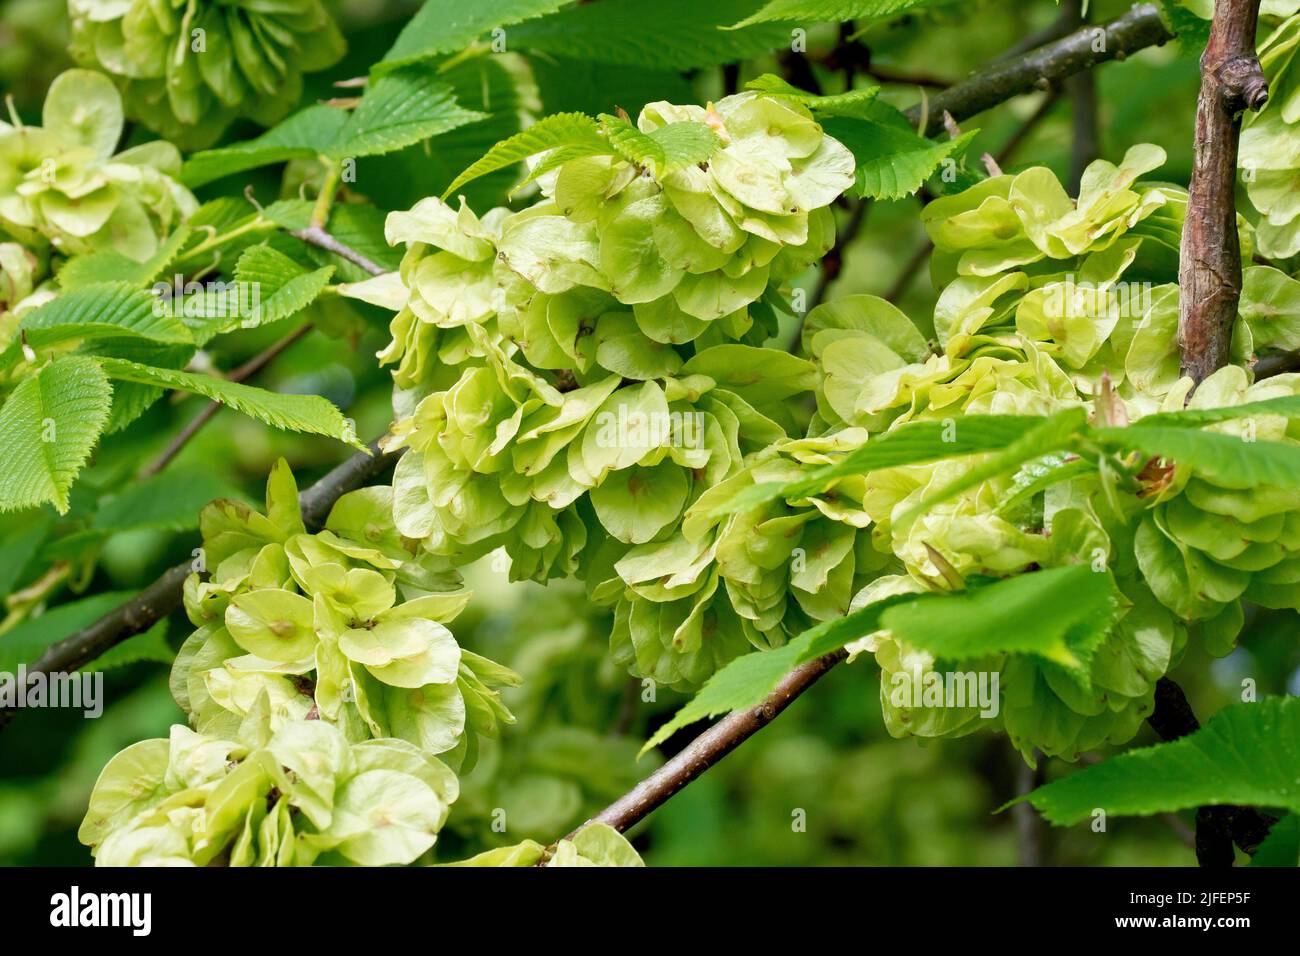 Wych Elm (ulmus glabra), close up of a mass of the thin round seed pods the tree produces in abundance during the spring. Stock Photo